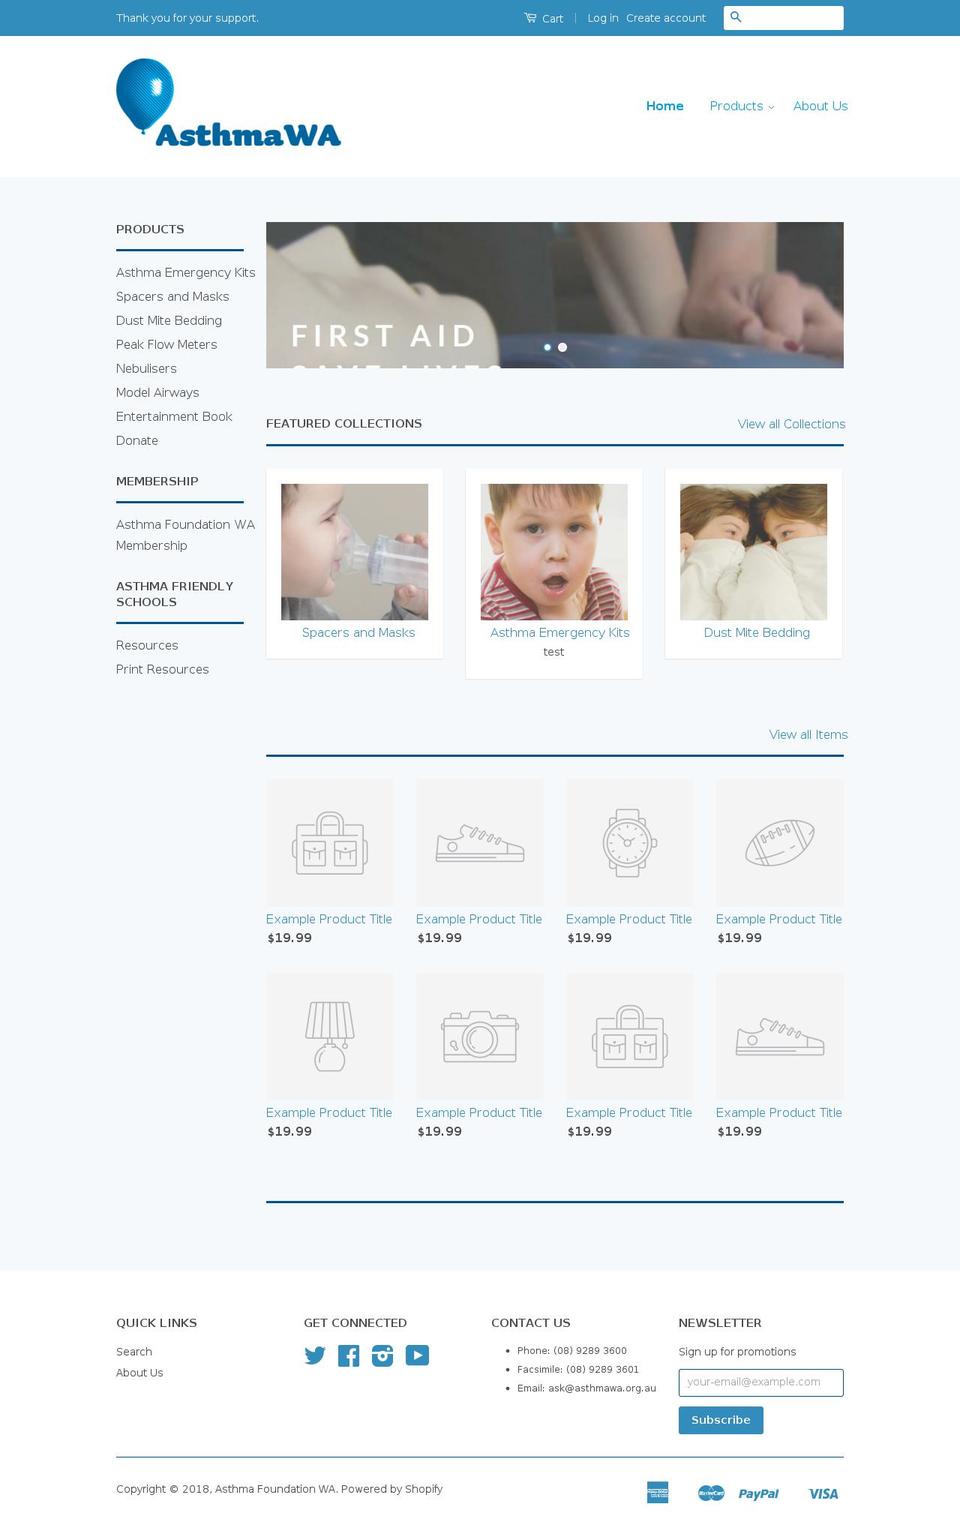 New Theme Shopify theme site example asthmafoundationwashop.org